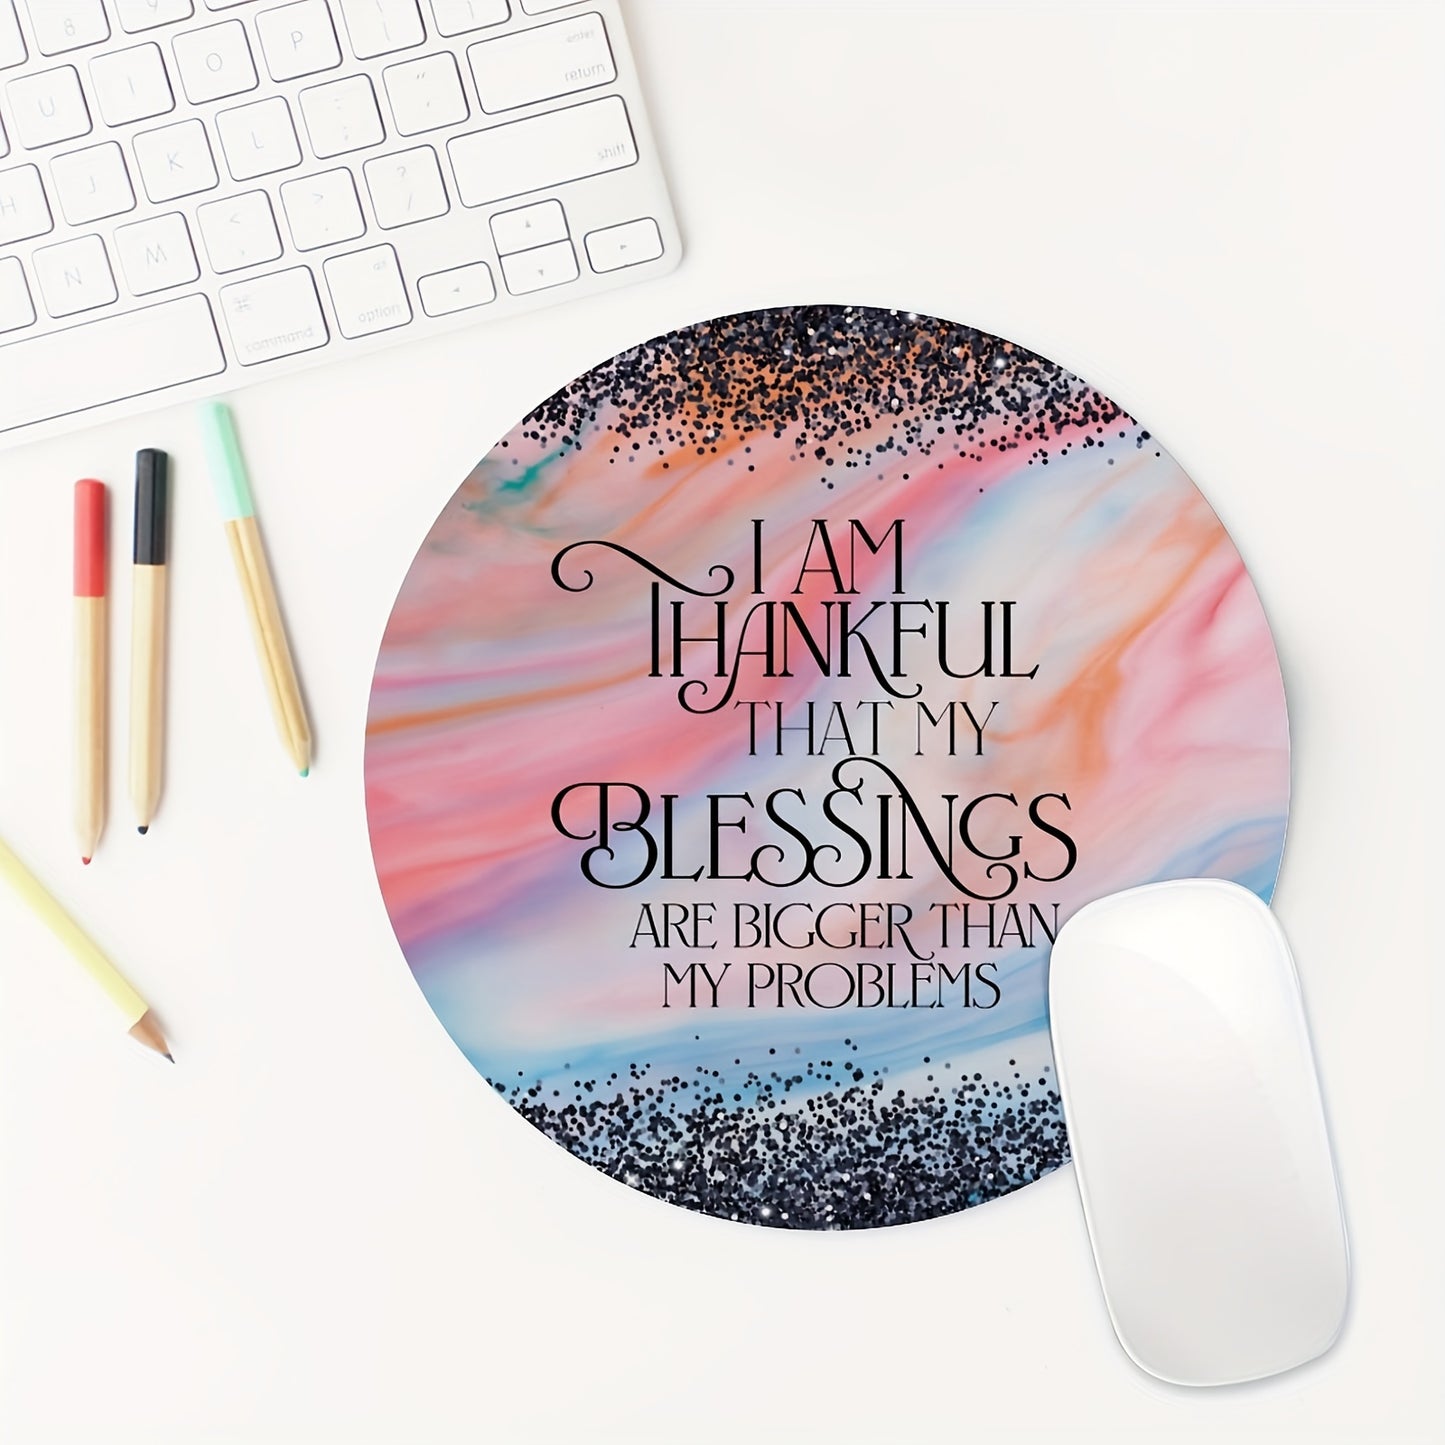 I Am Thankful That My Blessings Are Bigger Than My Problems Christian Computer Mouse Pad 7.8*7.8*0.12inch/ 20*20*0.3cm claimedbygoddesigns